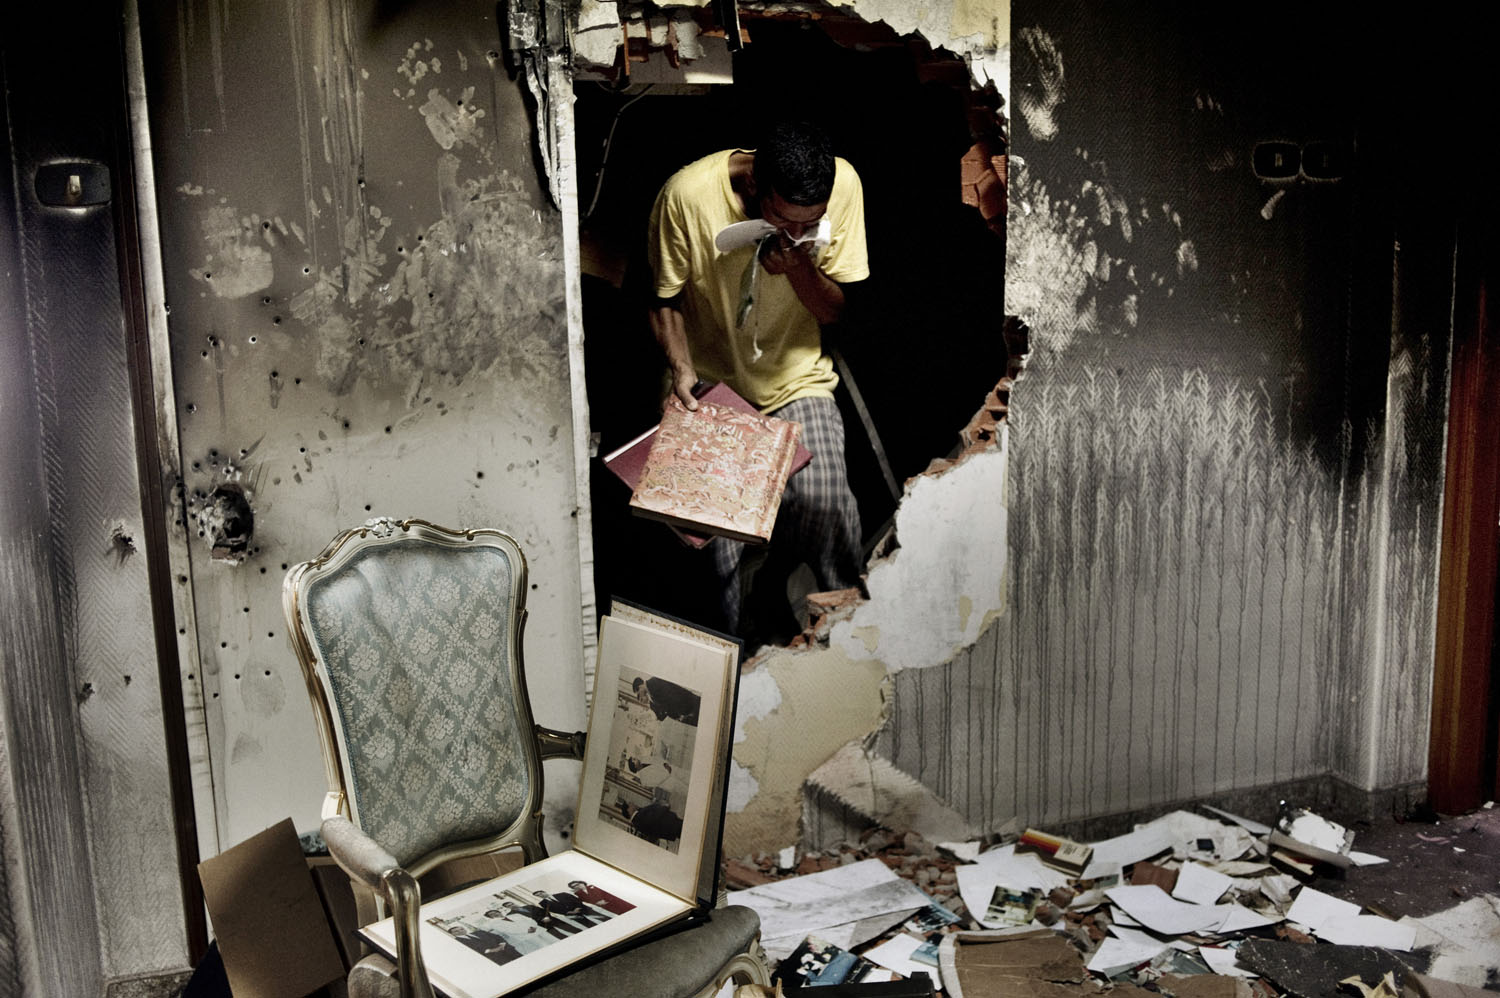 Rebels sift through photo albums inside Gaddafi's home in the Bab al-Aziziya compound of Tripoli, August 28, 2011. The photos were among hundreds strewn about the Gaddafi residence that depicted the Libyan leader with a range of African presidents and dictators.